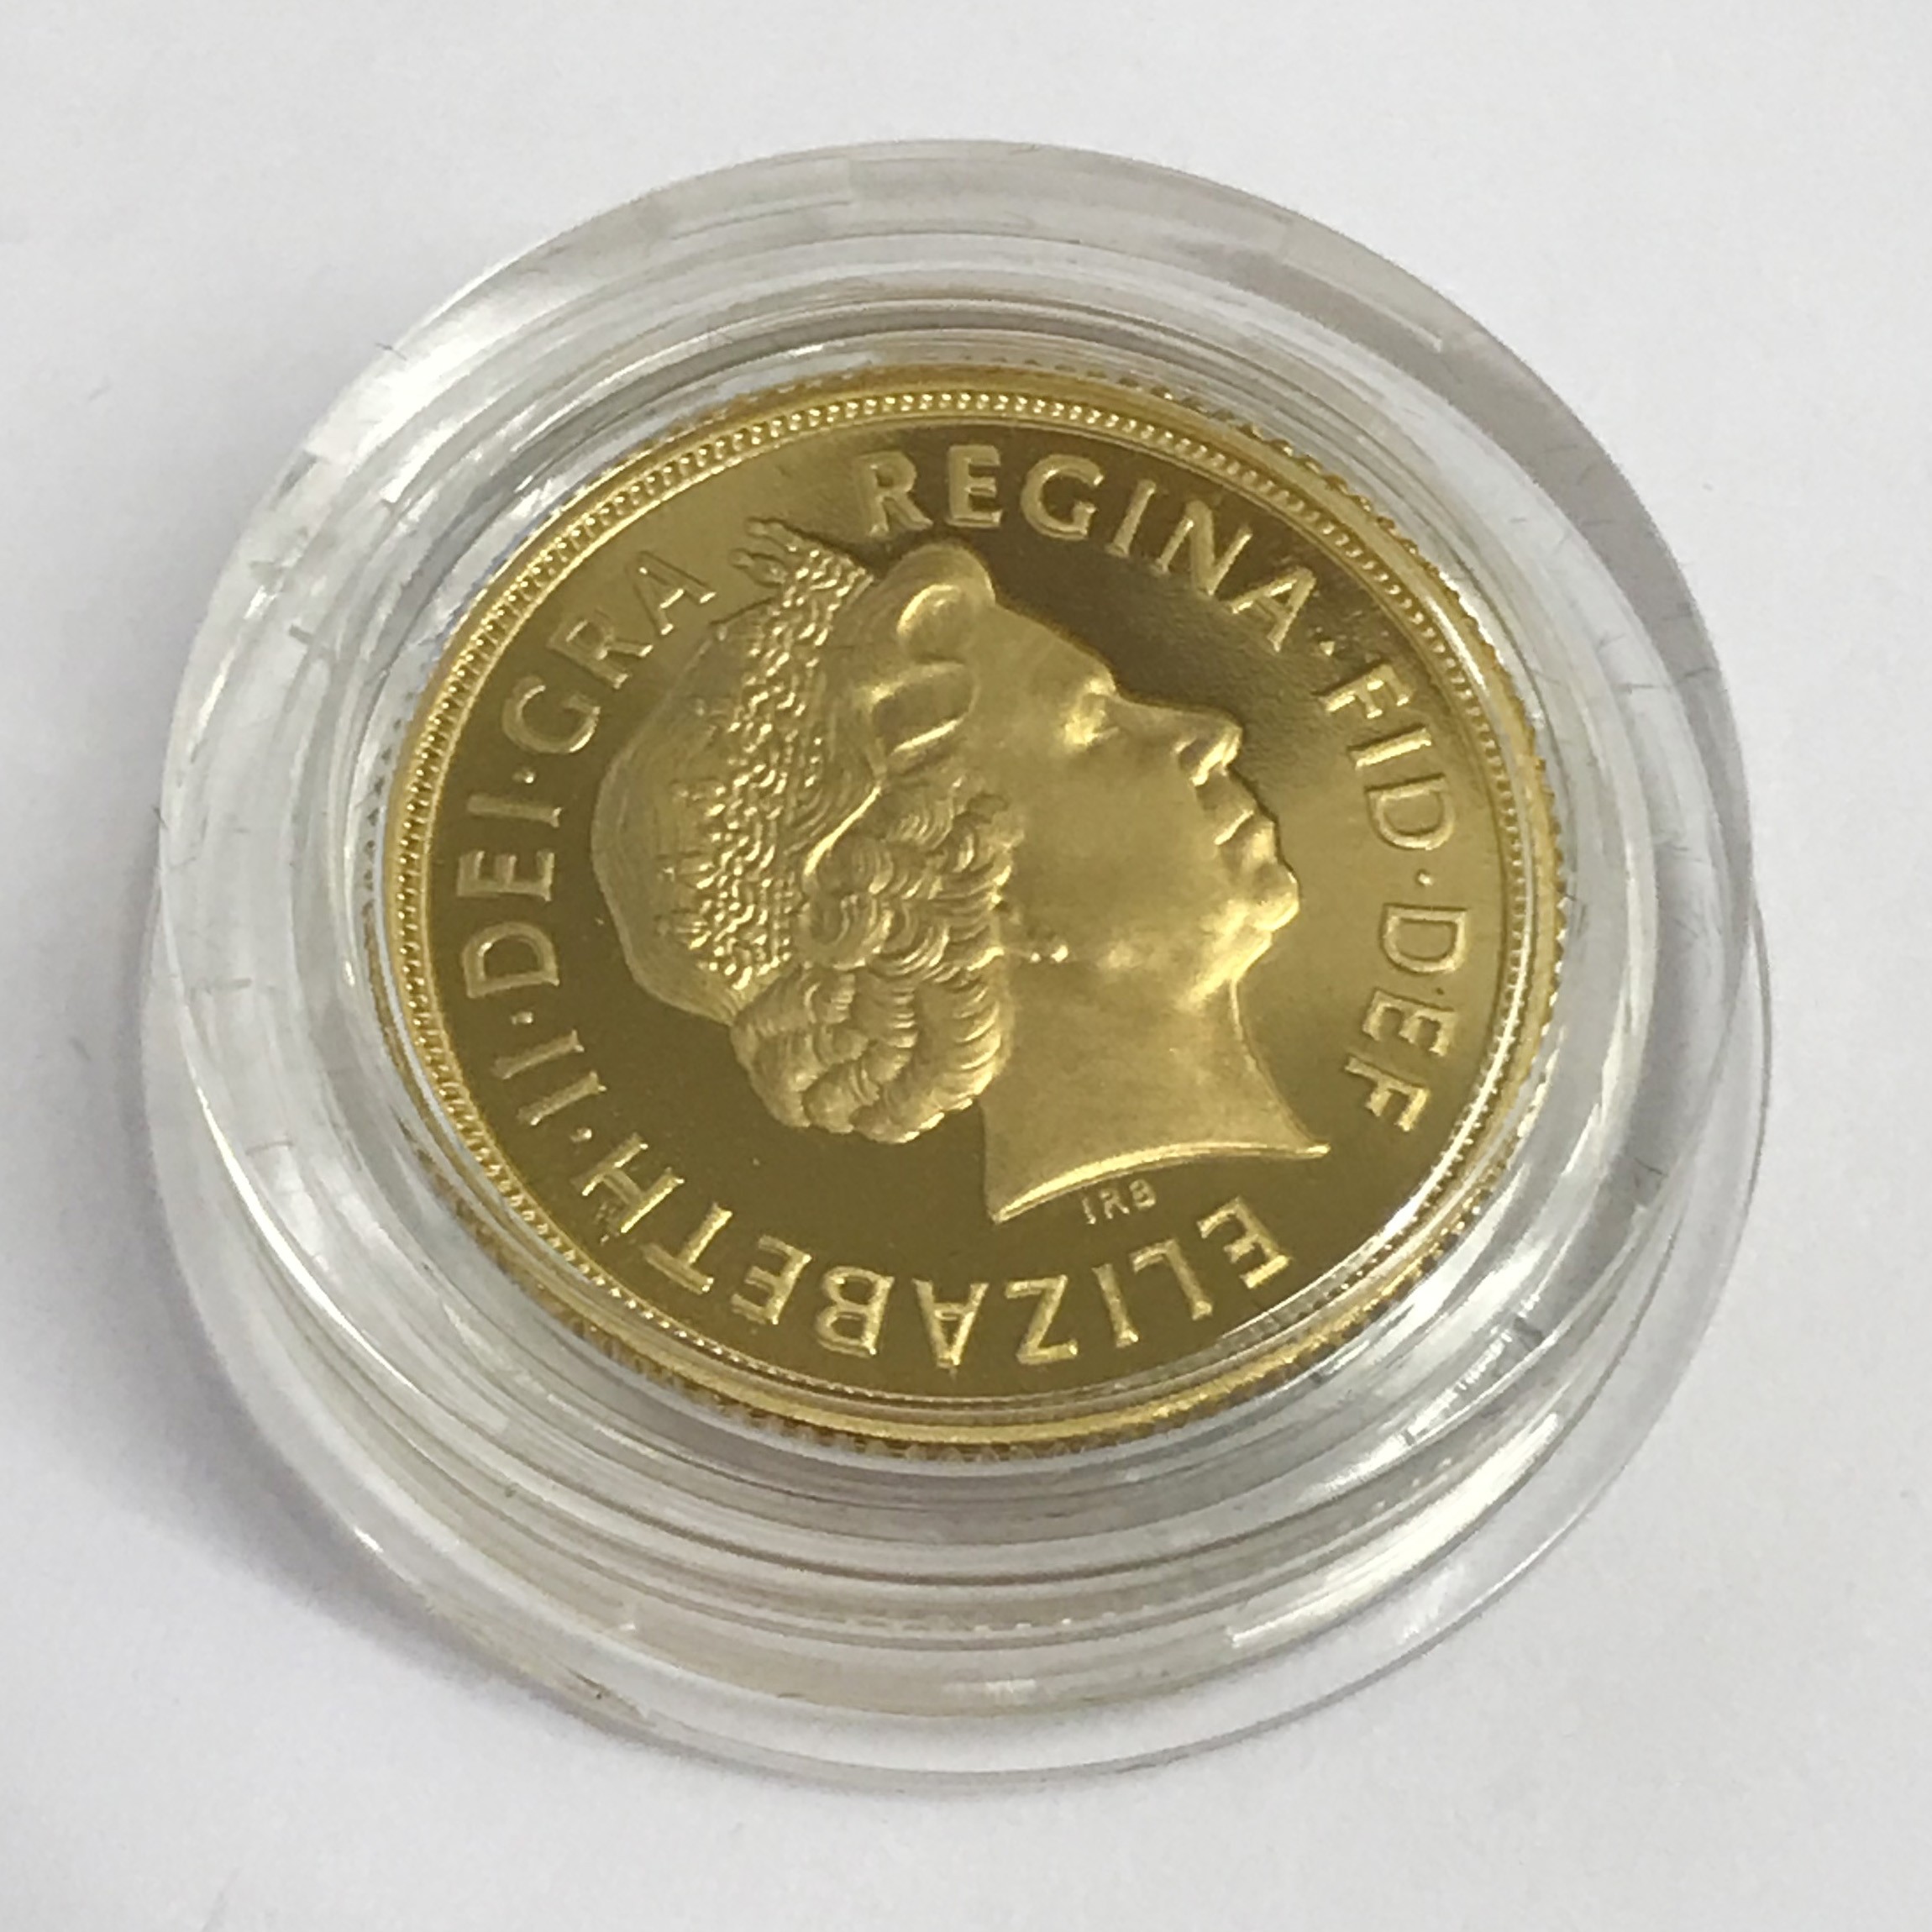 2005 GOLD SOVEREIGN COIN IN MINT CONDITION - Image 2 of 3